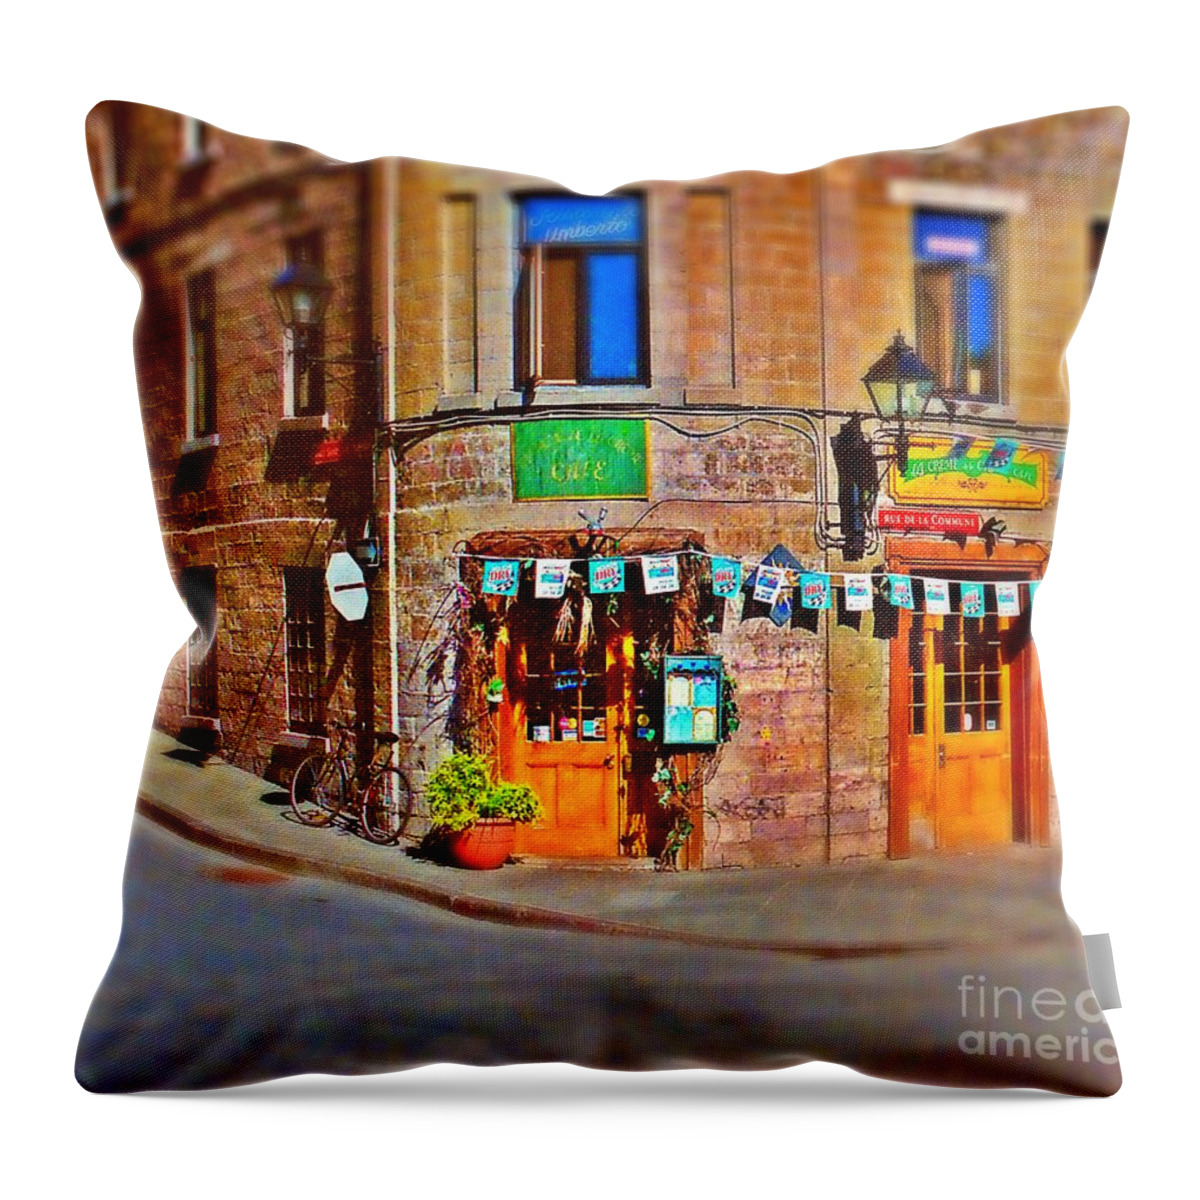  Throw Pillow featuring the photograph Cafe on the Corner by Rodney Lee Williams